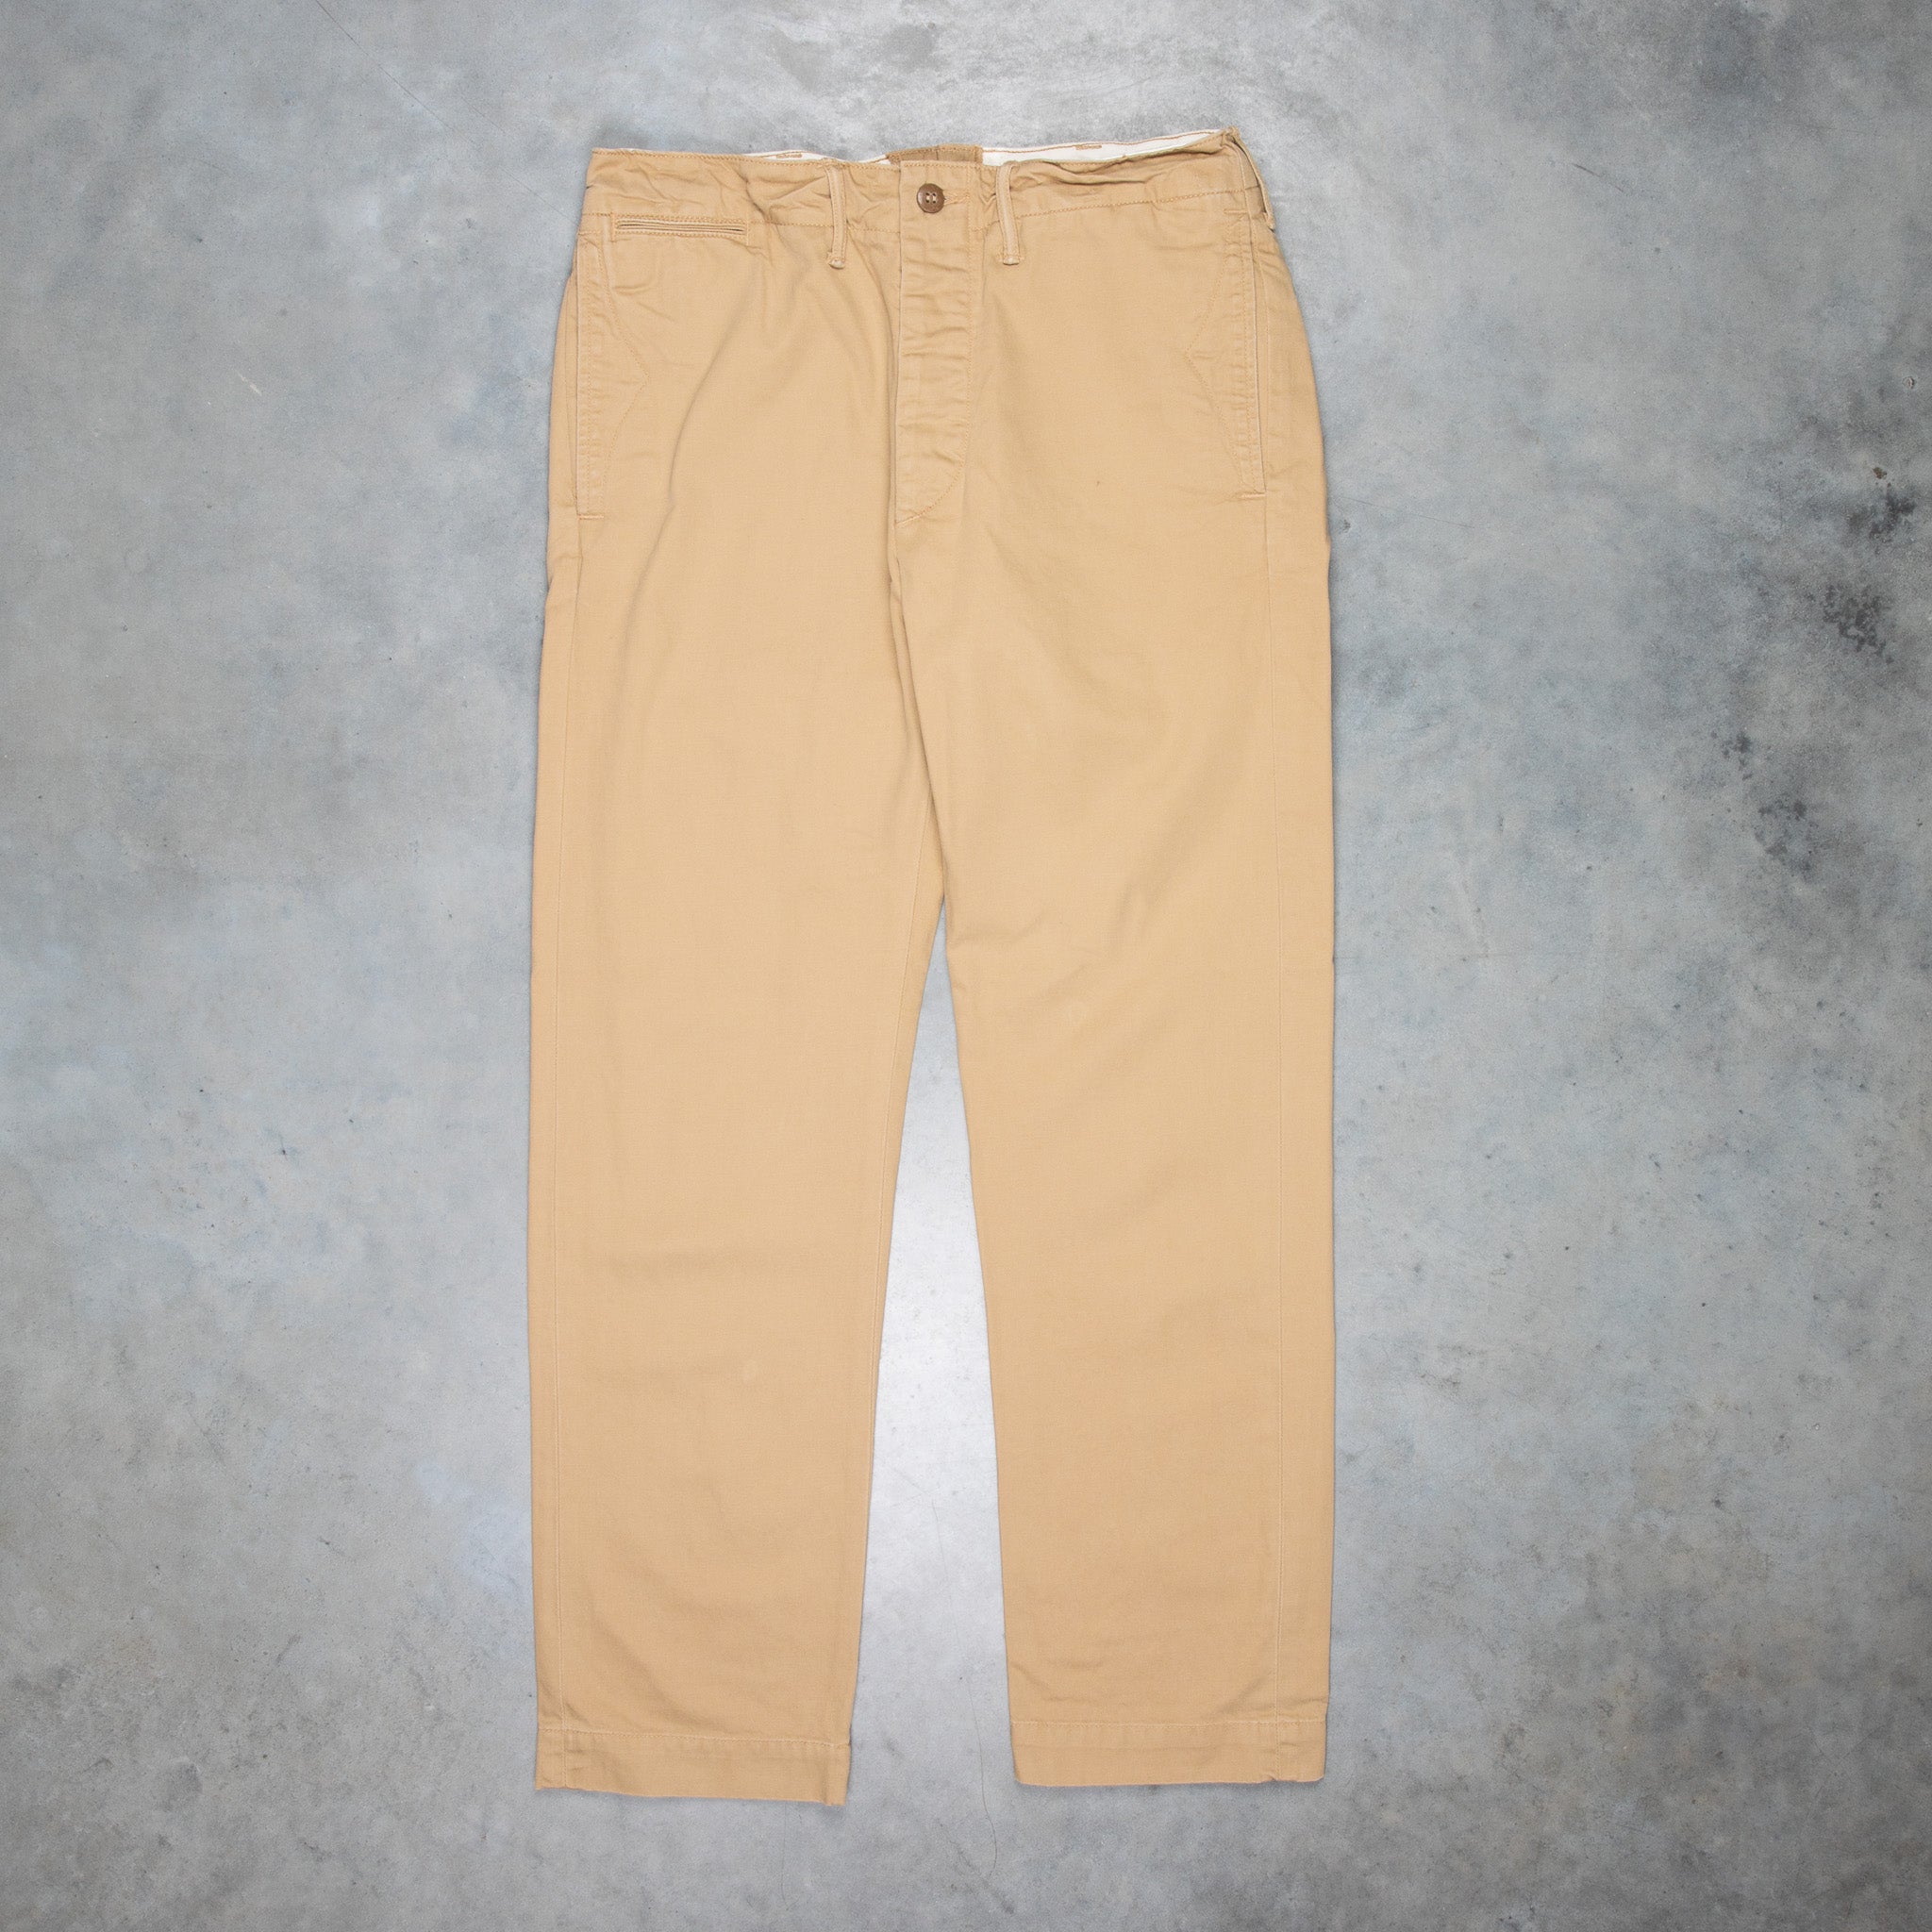 Reserve Collection Tailored Fit Flat Front Chino Pants CLEARANCE - All  Clearance